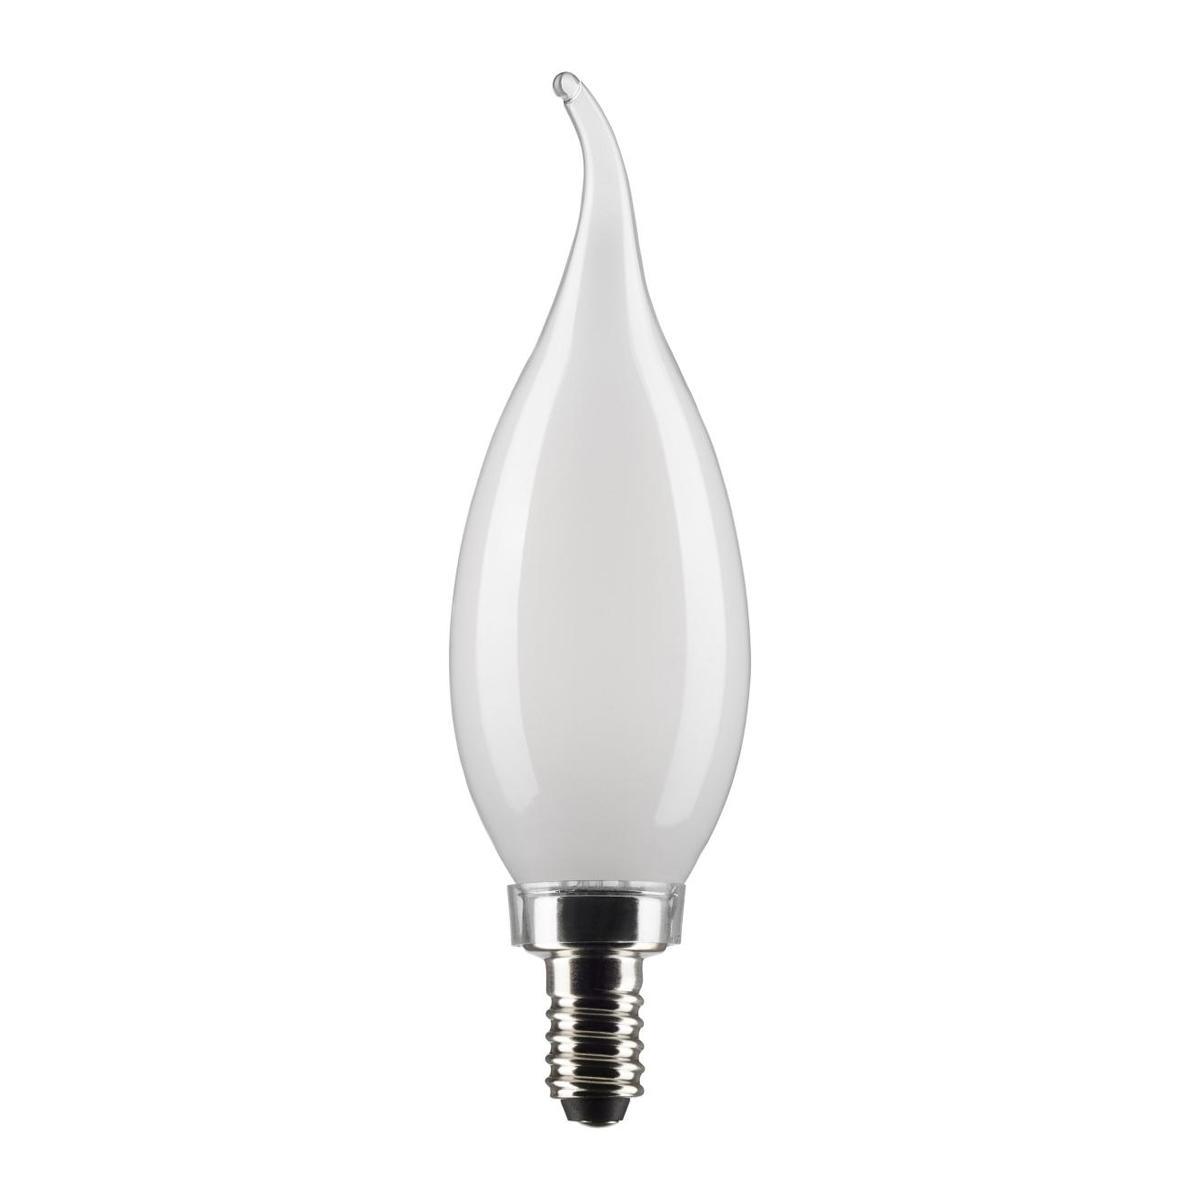 CA10 Candle LED Bulb, 40W Equivalent,4 Watt, 350 Lumens, 3000K, E12 Candelabra Base, Frosted Finish, Pack Of 2 - Bees Lighting